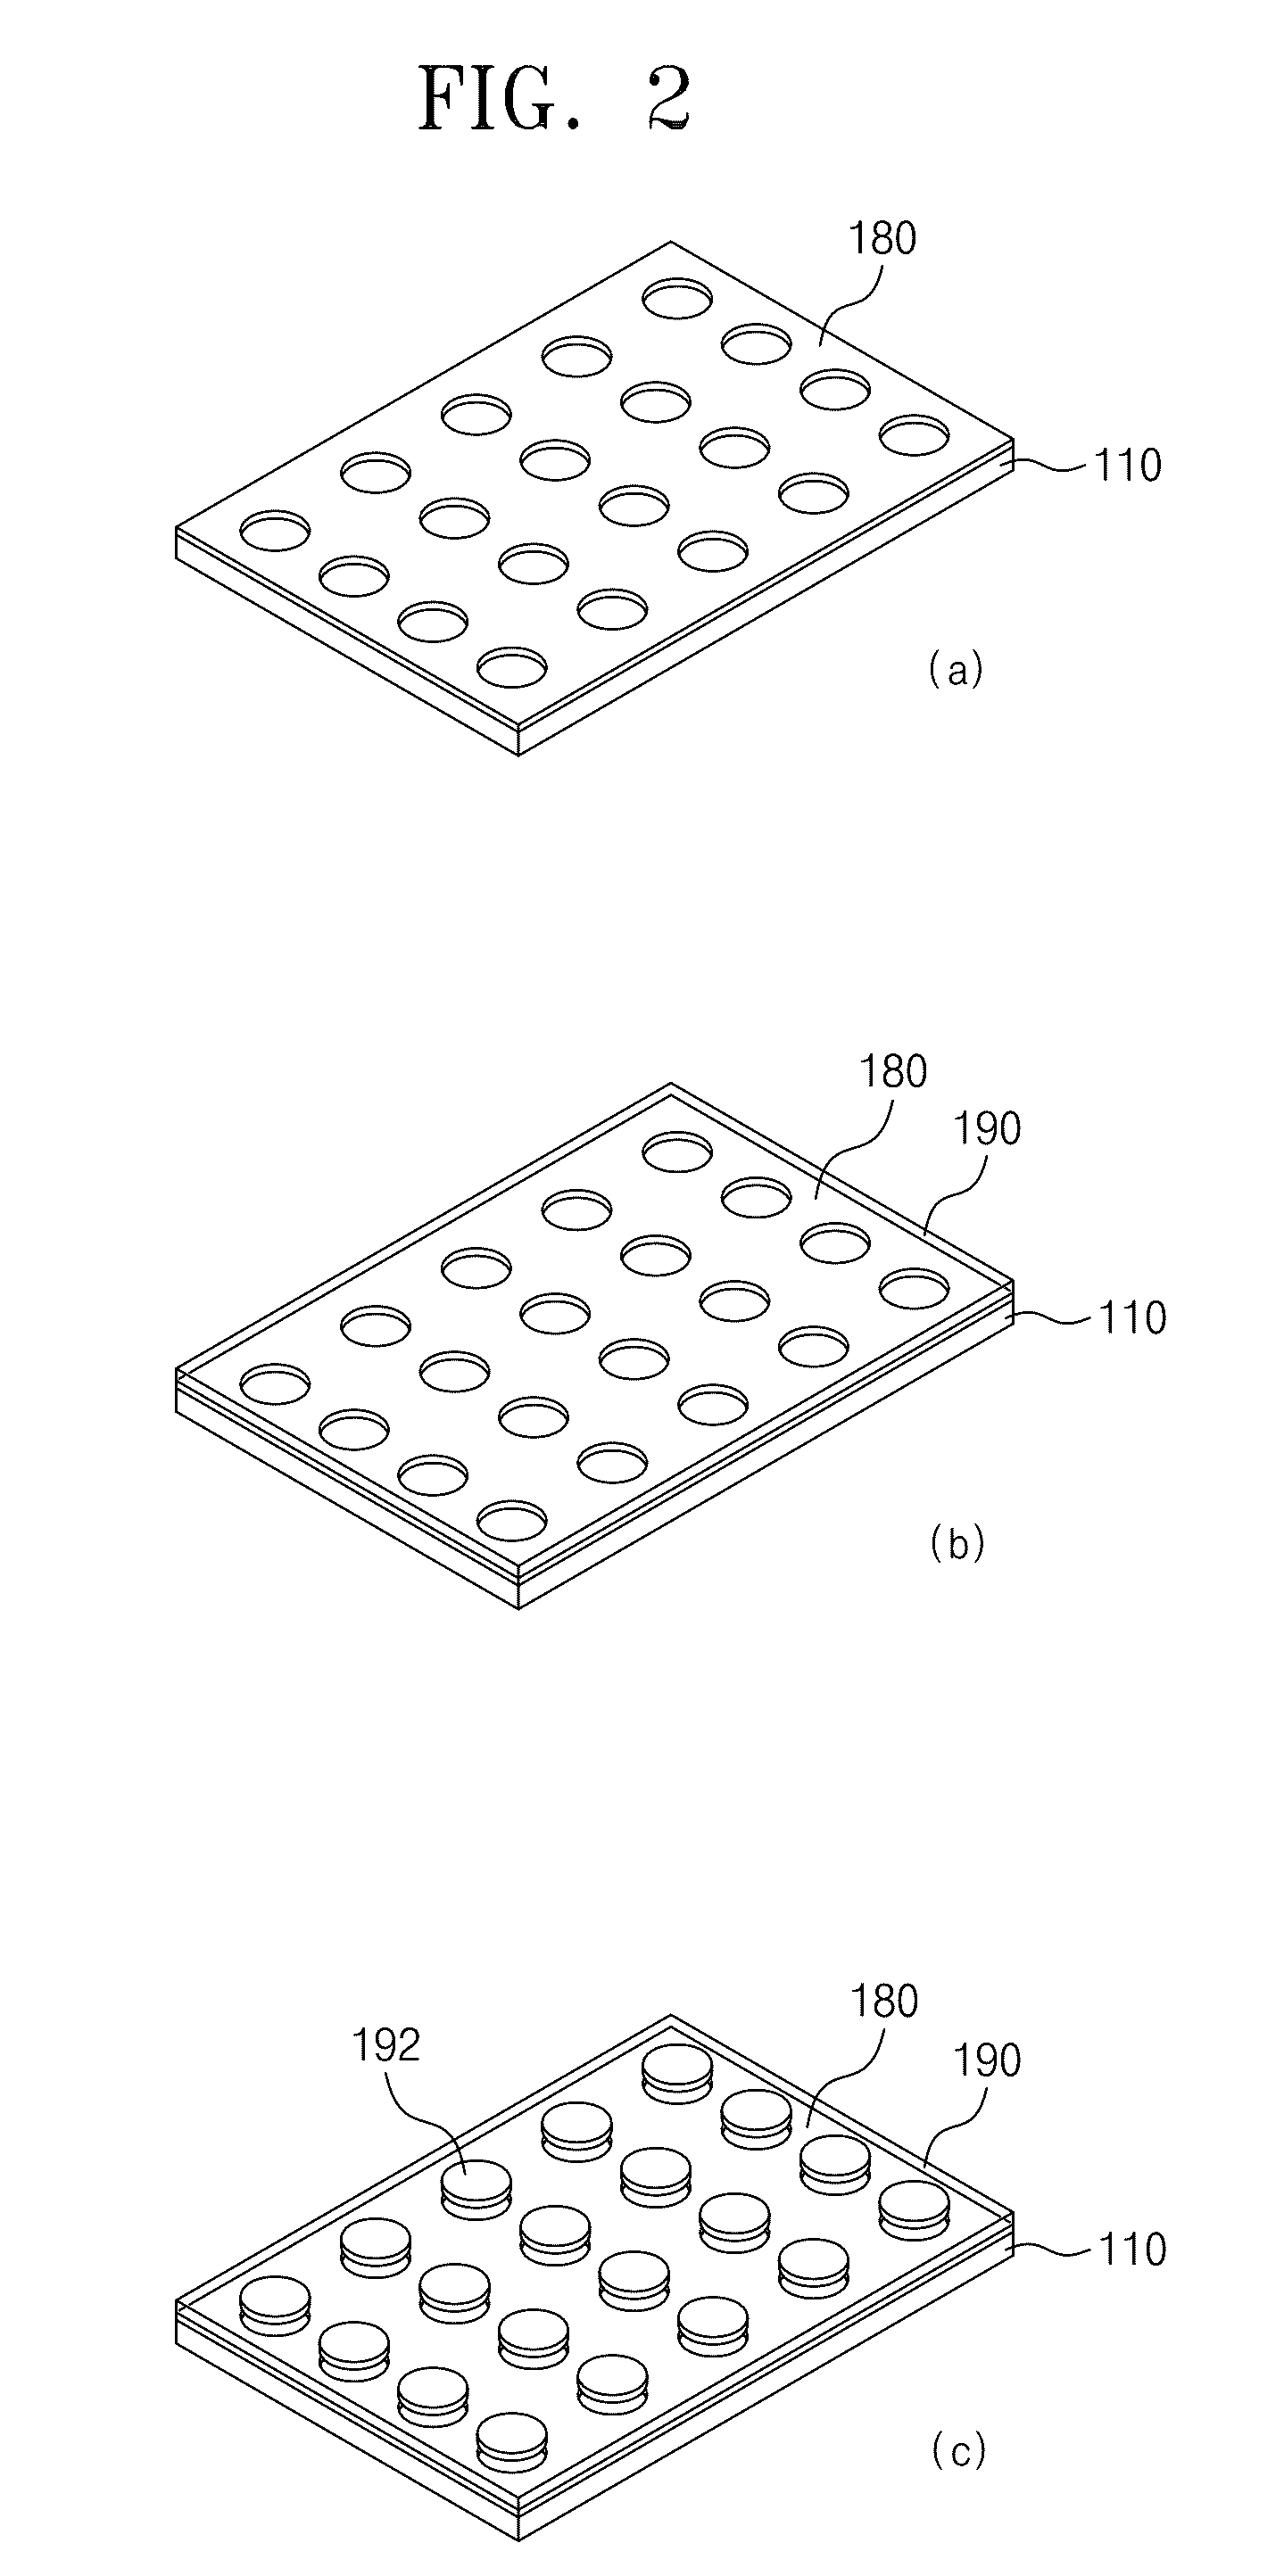 Ir photodetector using metamaterial-based on an antireflection coating to match the impedance between air and sp resonator